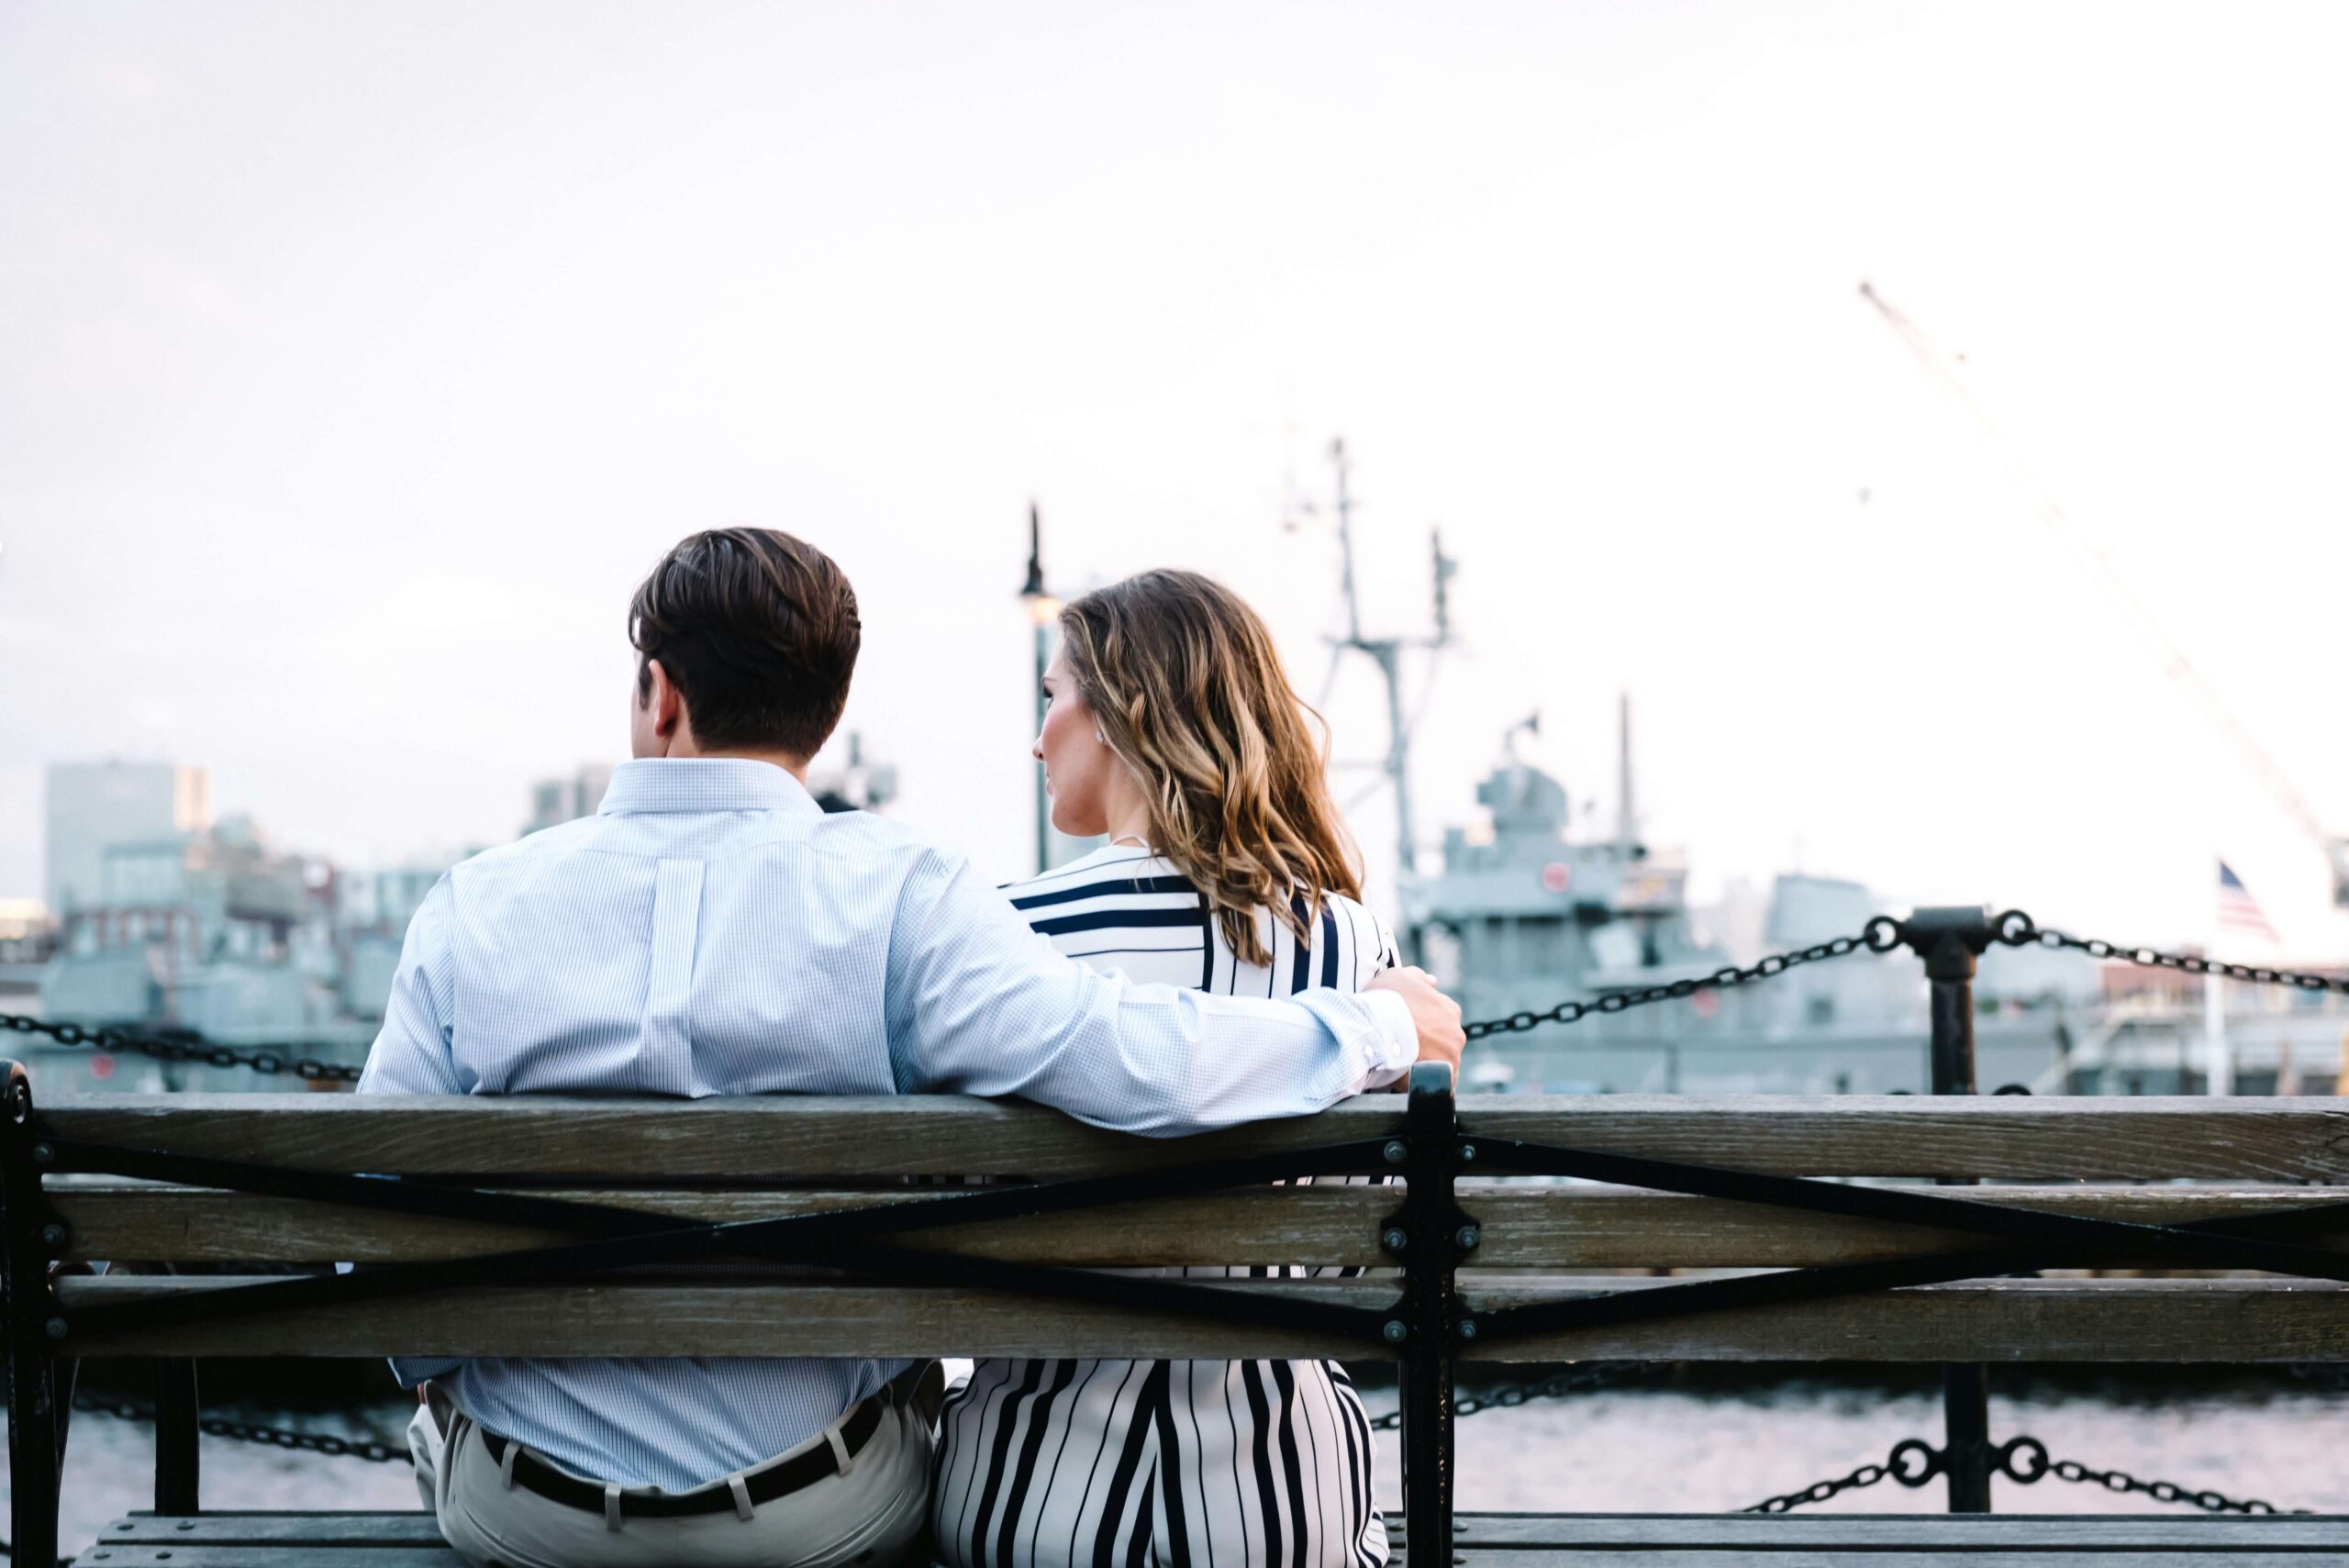 Image of a couple sitting thoughtfully on a bench looking out at water. With the help of couples therapy in Miami, FL, you and your partner can overcome verbal abuse and communication issues in your relationship.